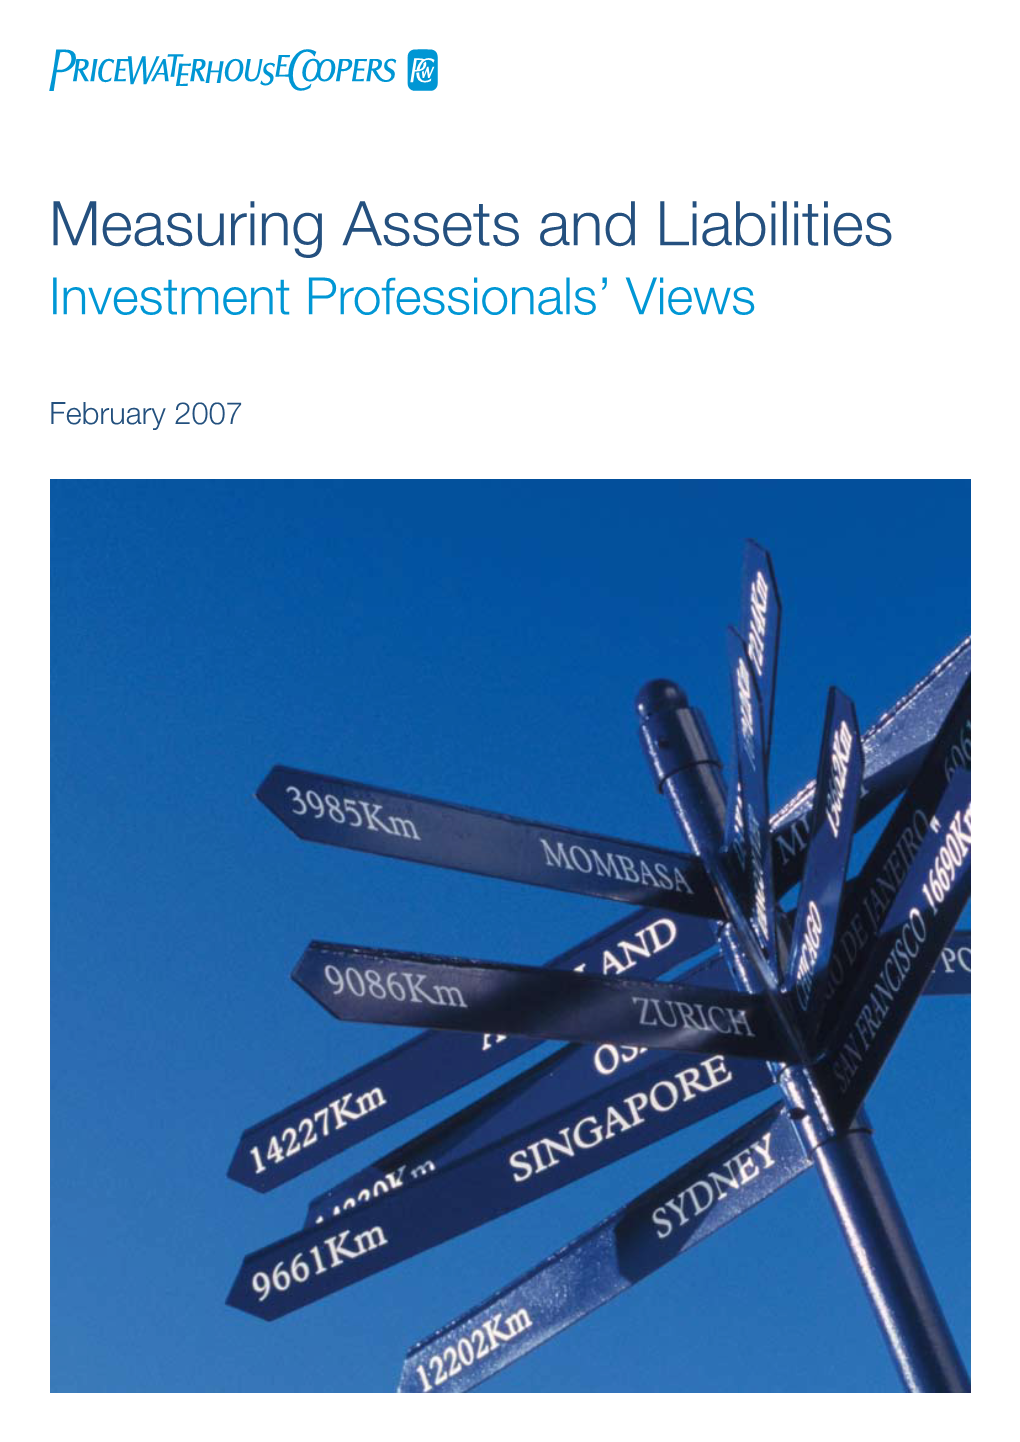 Measuring Assets and Liabilities Investment Professionals’ Views